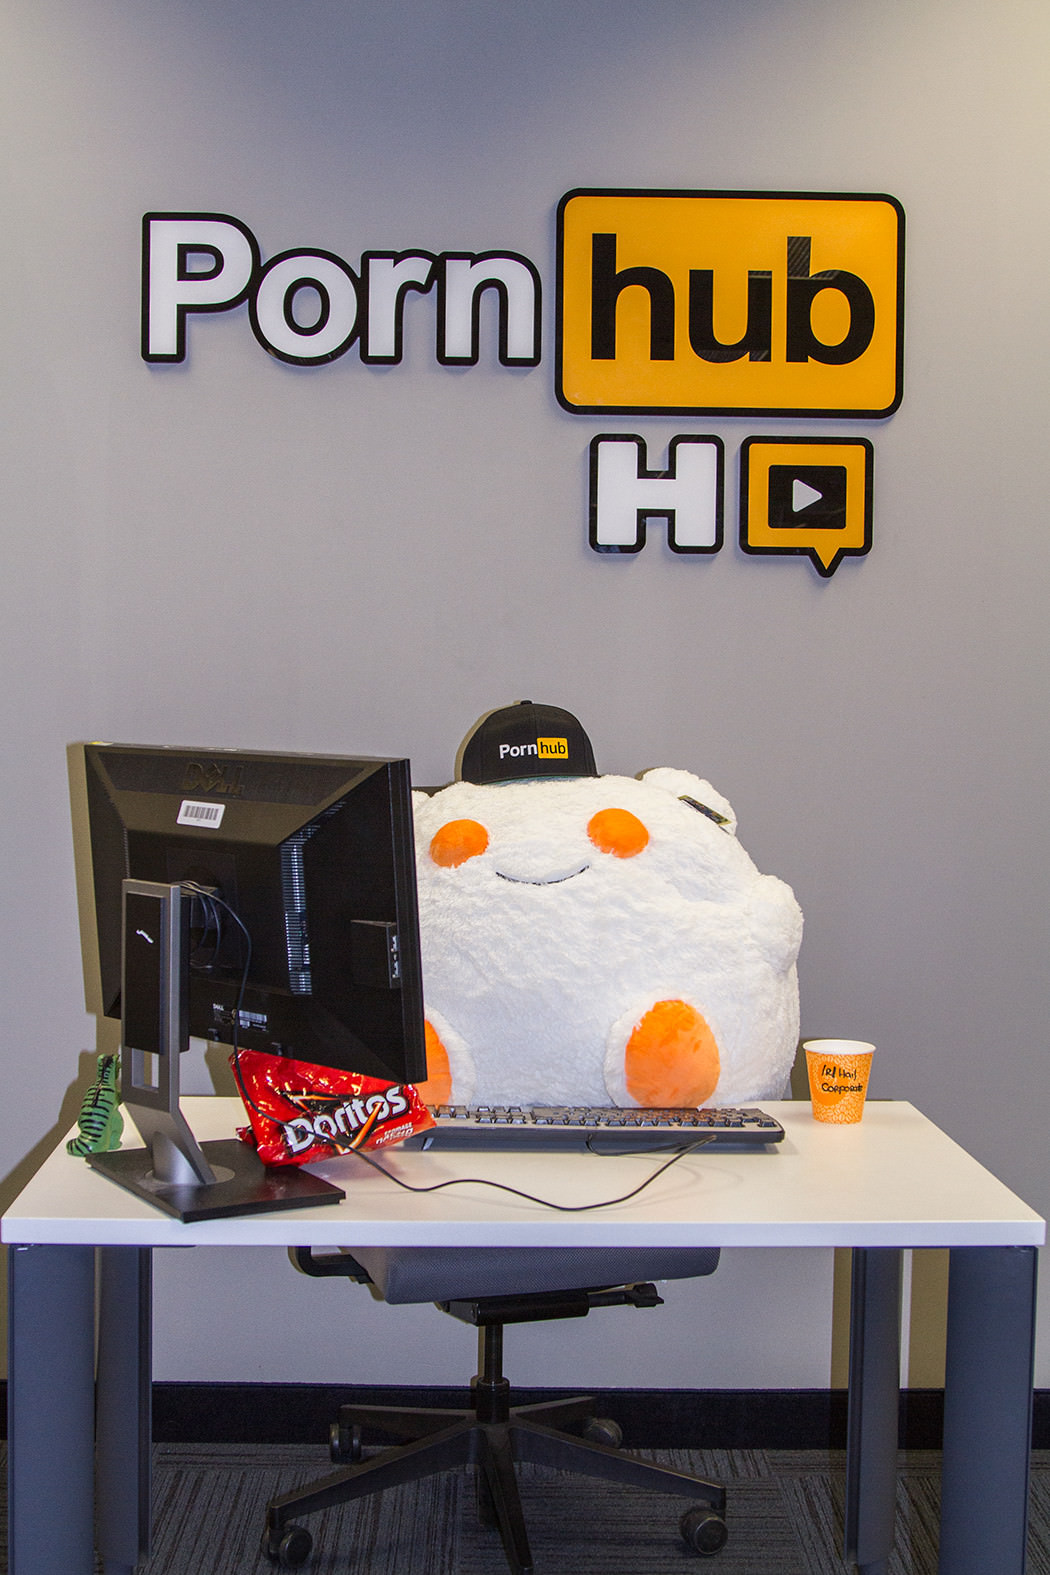 "Our new employee's desk, he's hard at work already programming the best porn features."